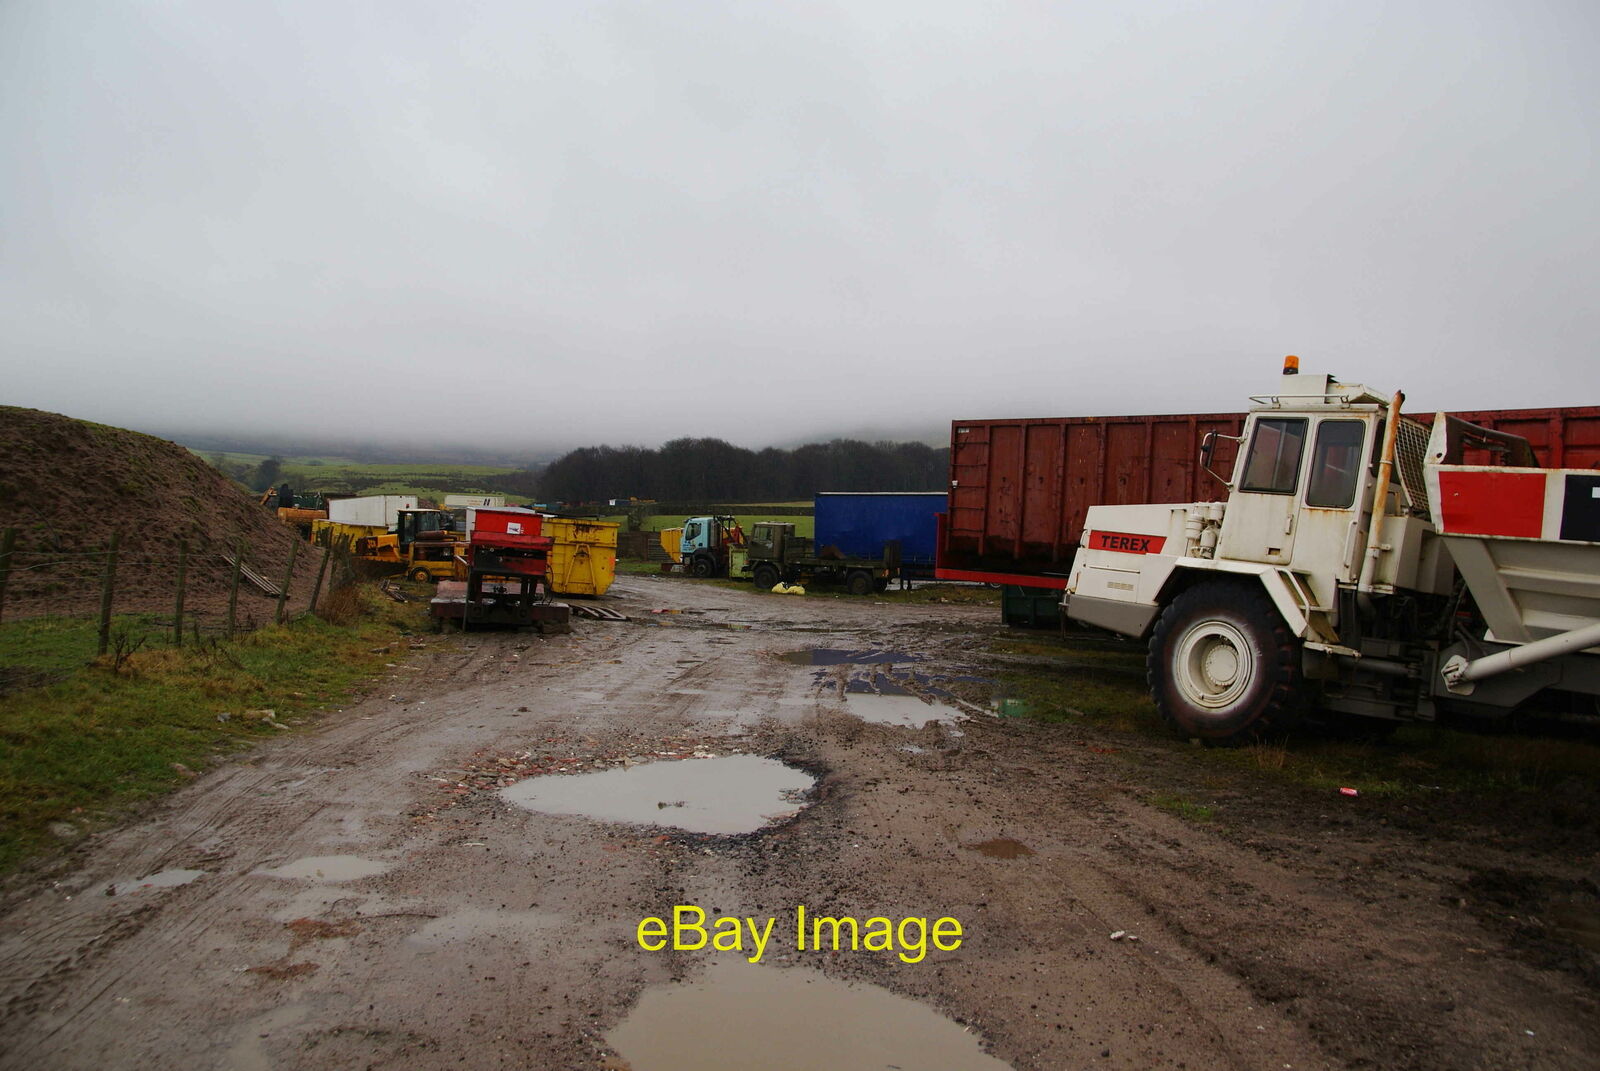 Photo 6x4 An accumulation of vehicles at Old Barn Farm Lane Ends It was a c2011